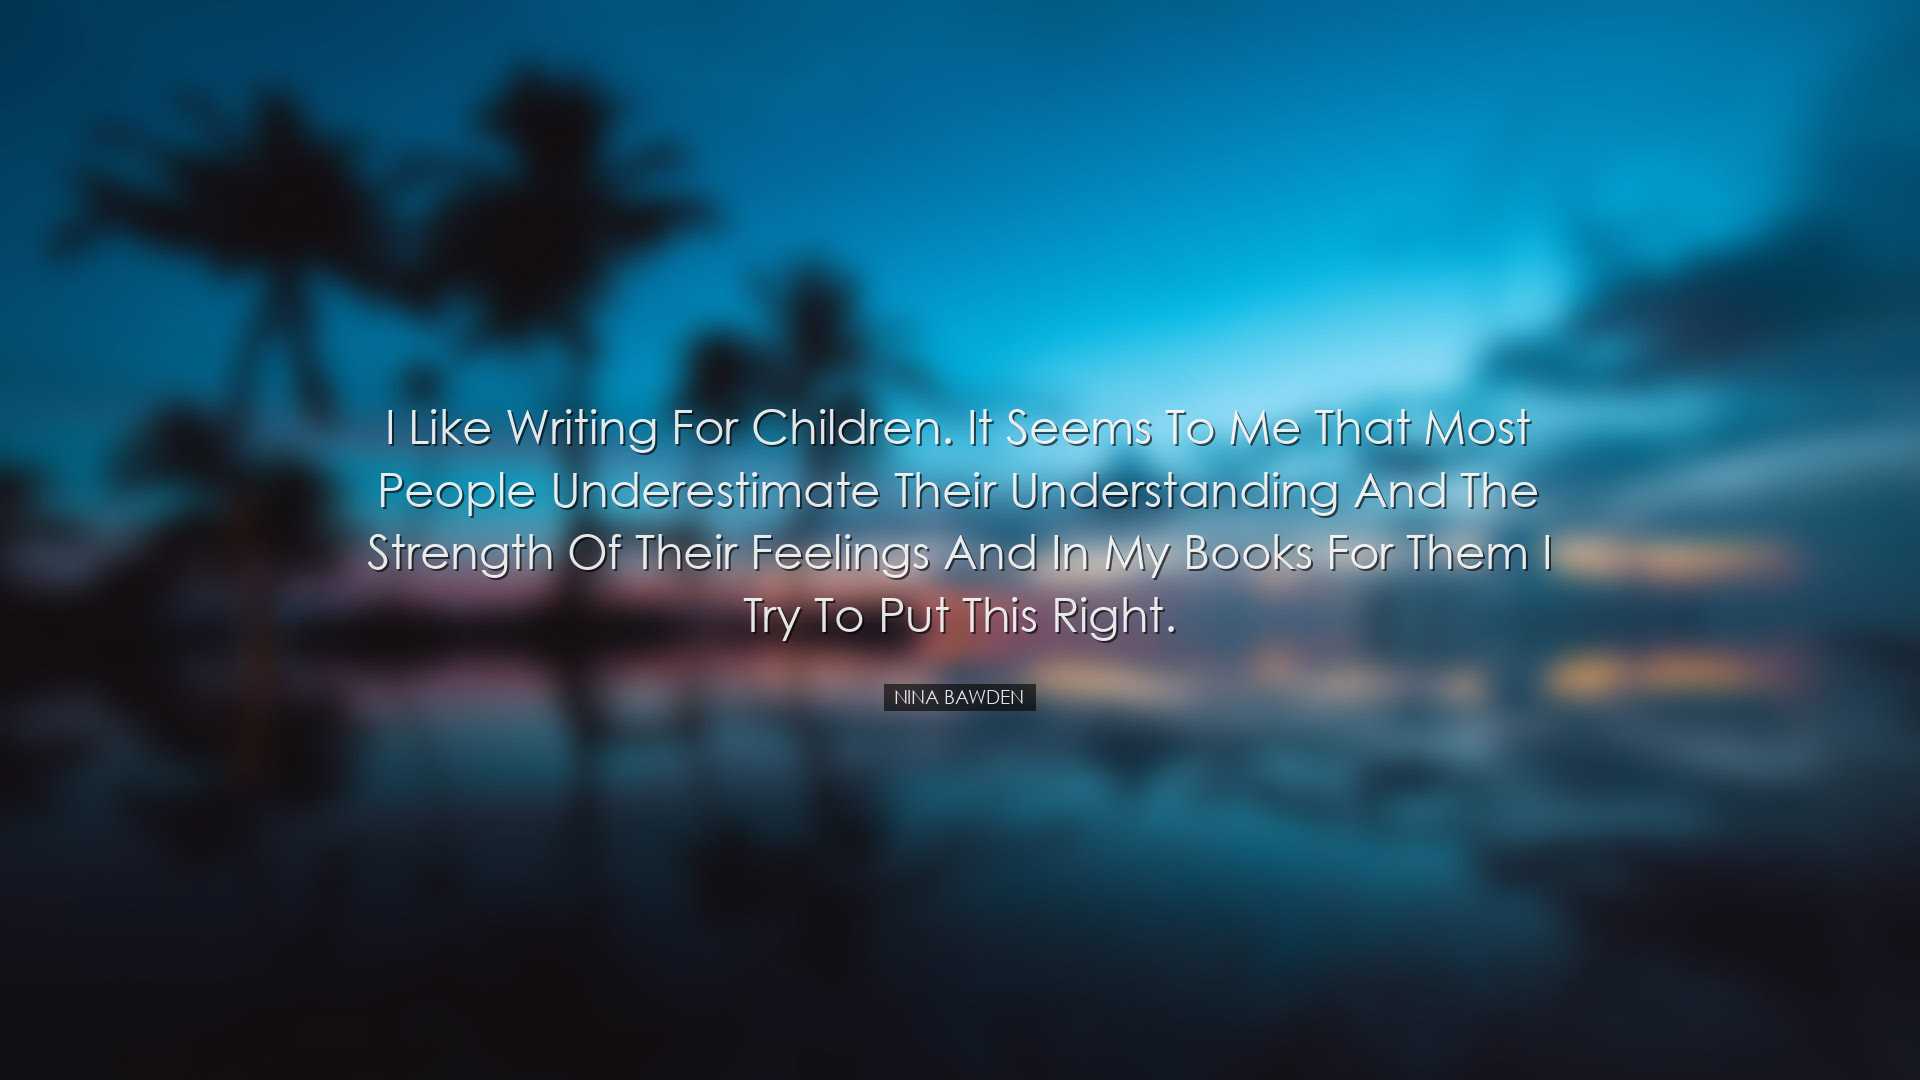 I like writing for children. It seems to me that most people under